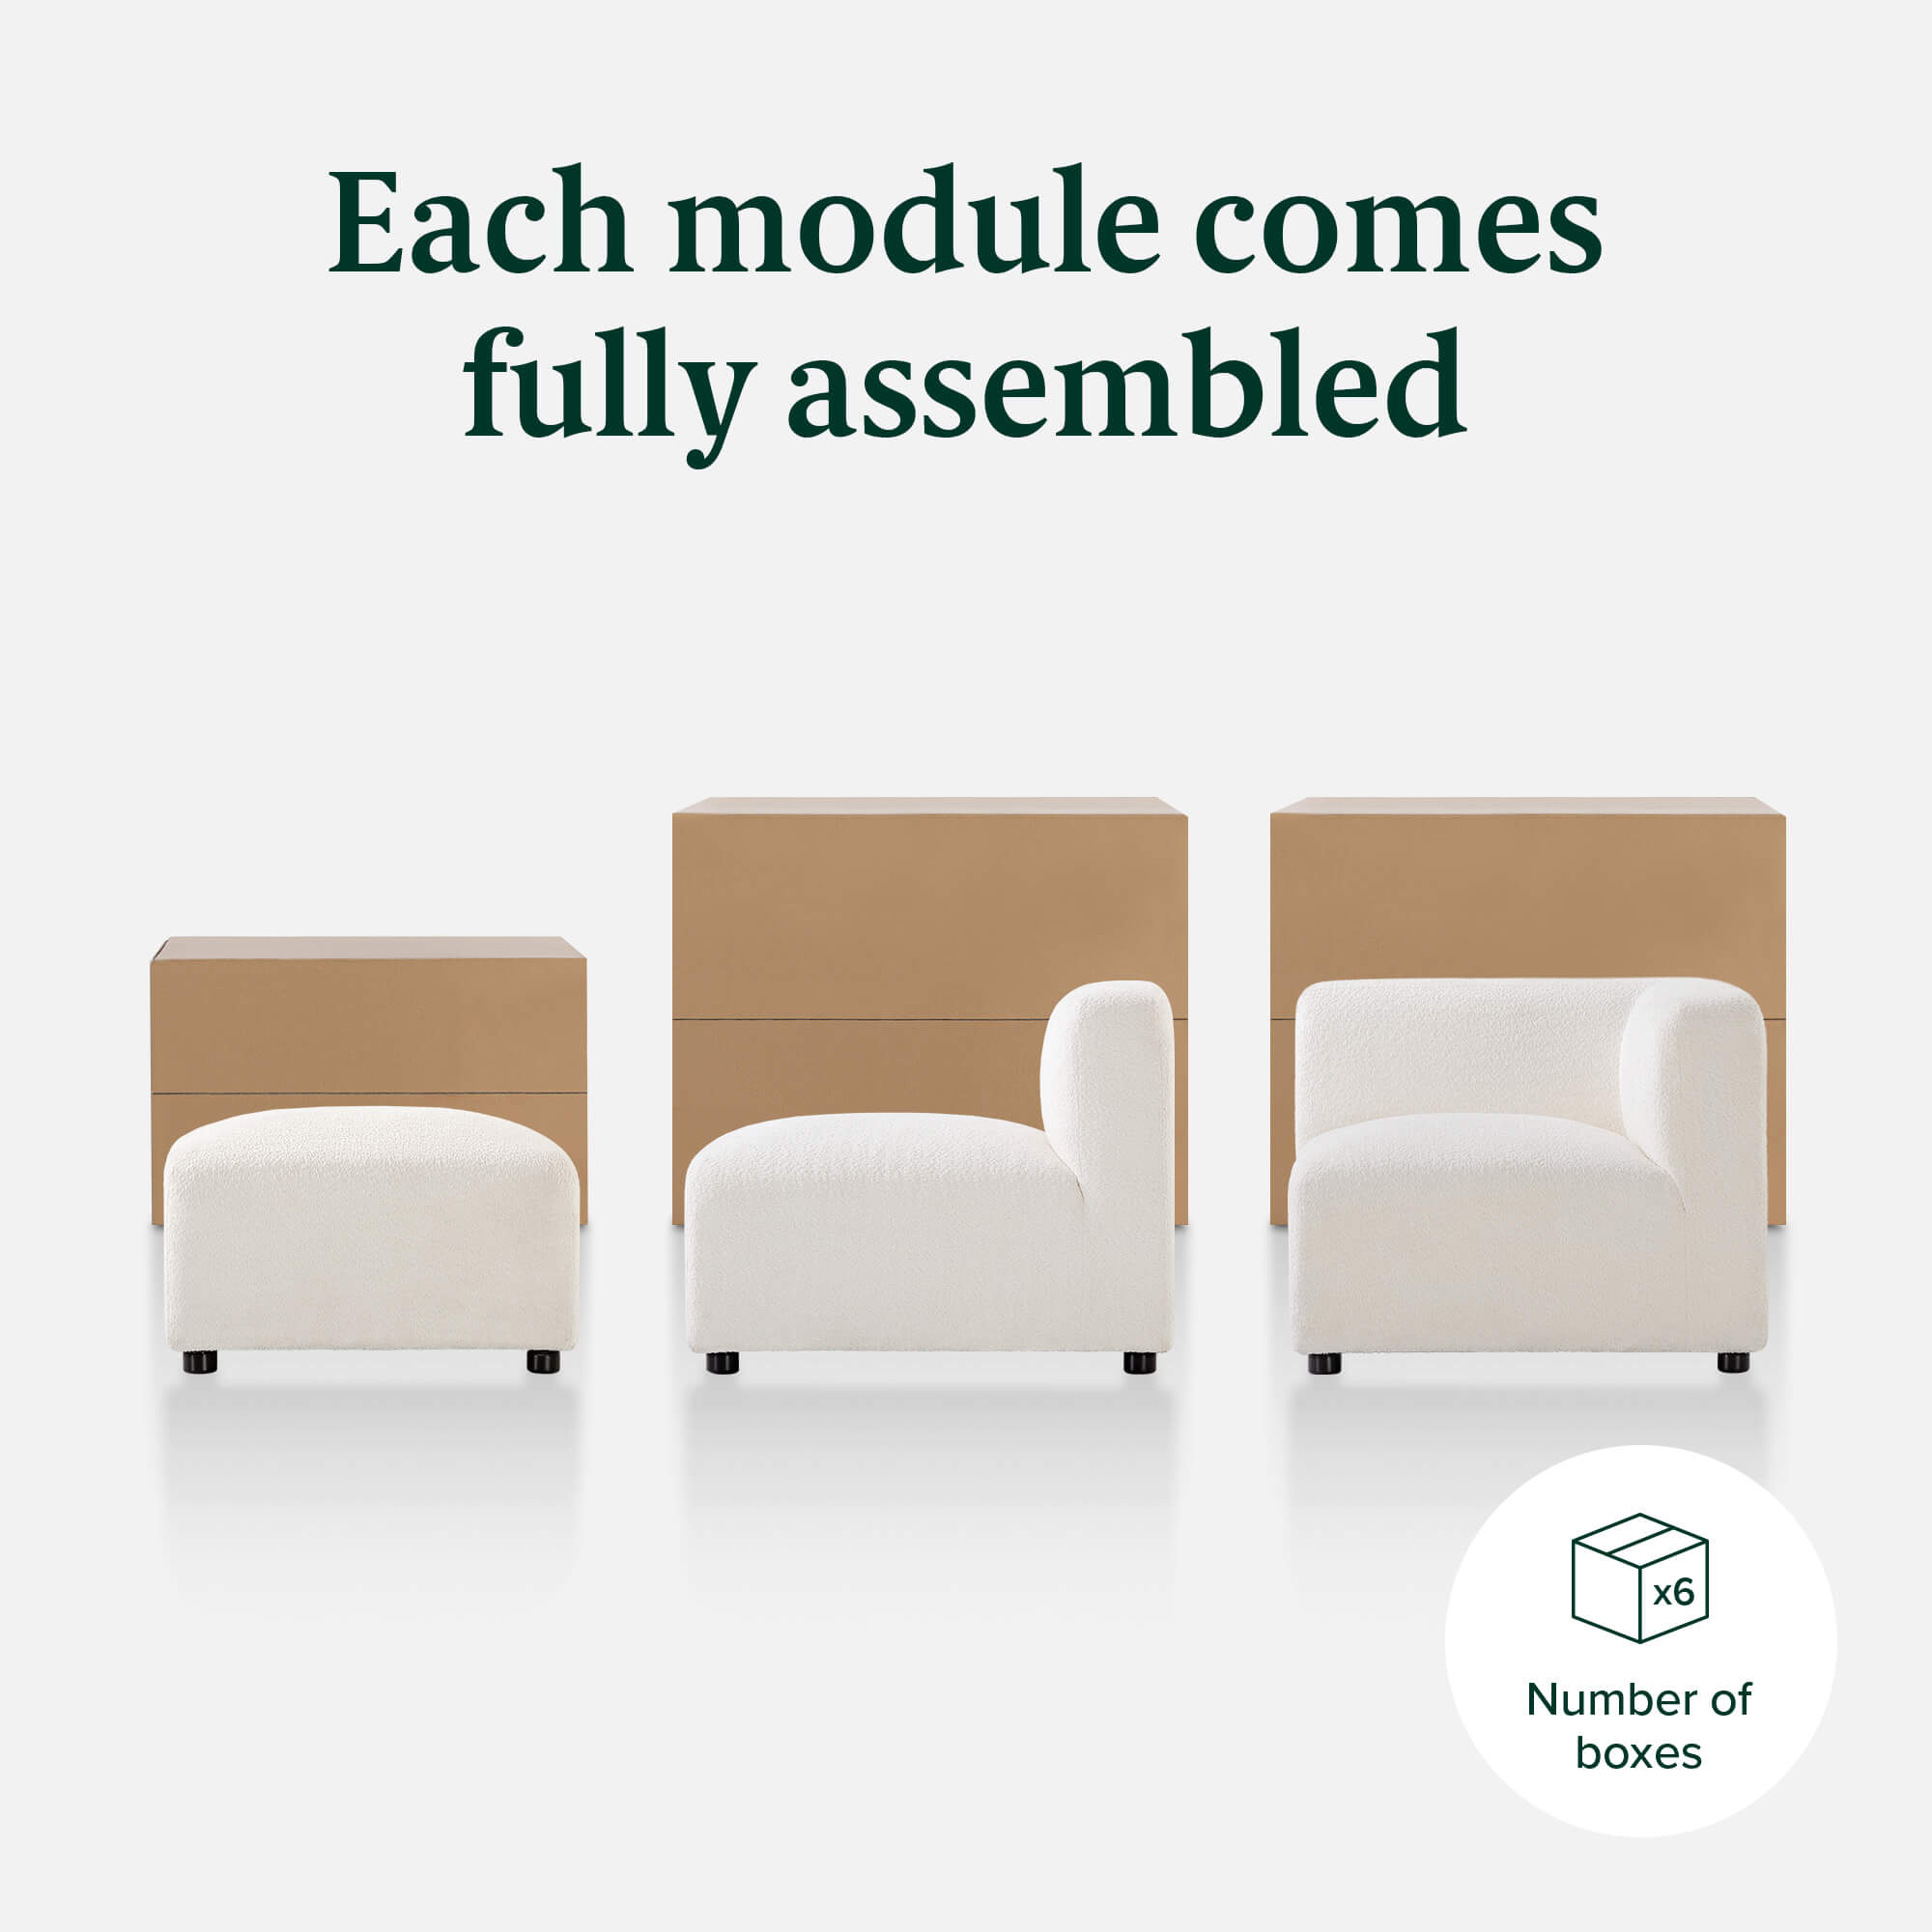 View of the Luca Double Chaise Sectional Sofa's modules, highlighting the ease of assembly in 6 boxes